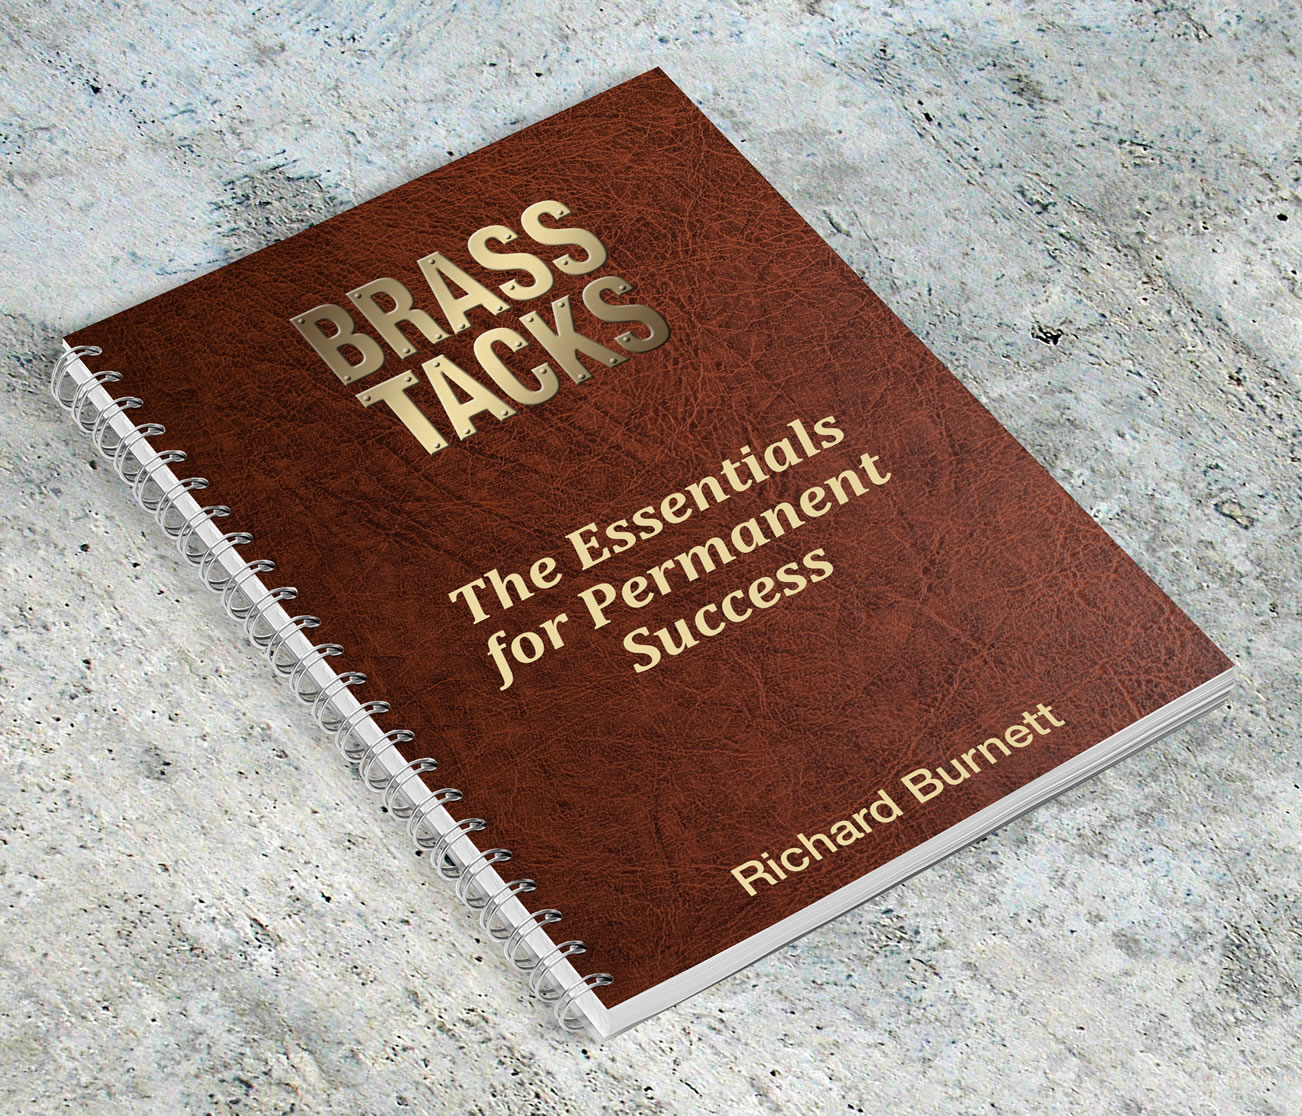 Book entitled Brass Tacks - The Essentials for Permanent Success